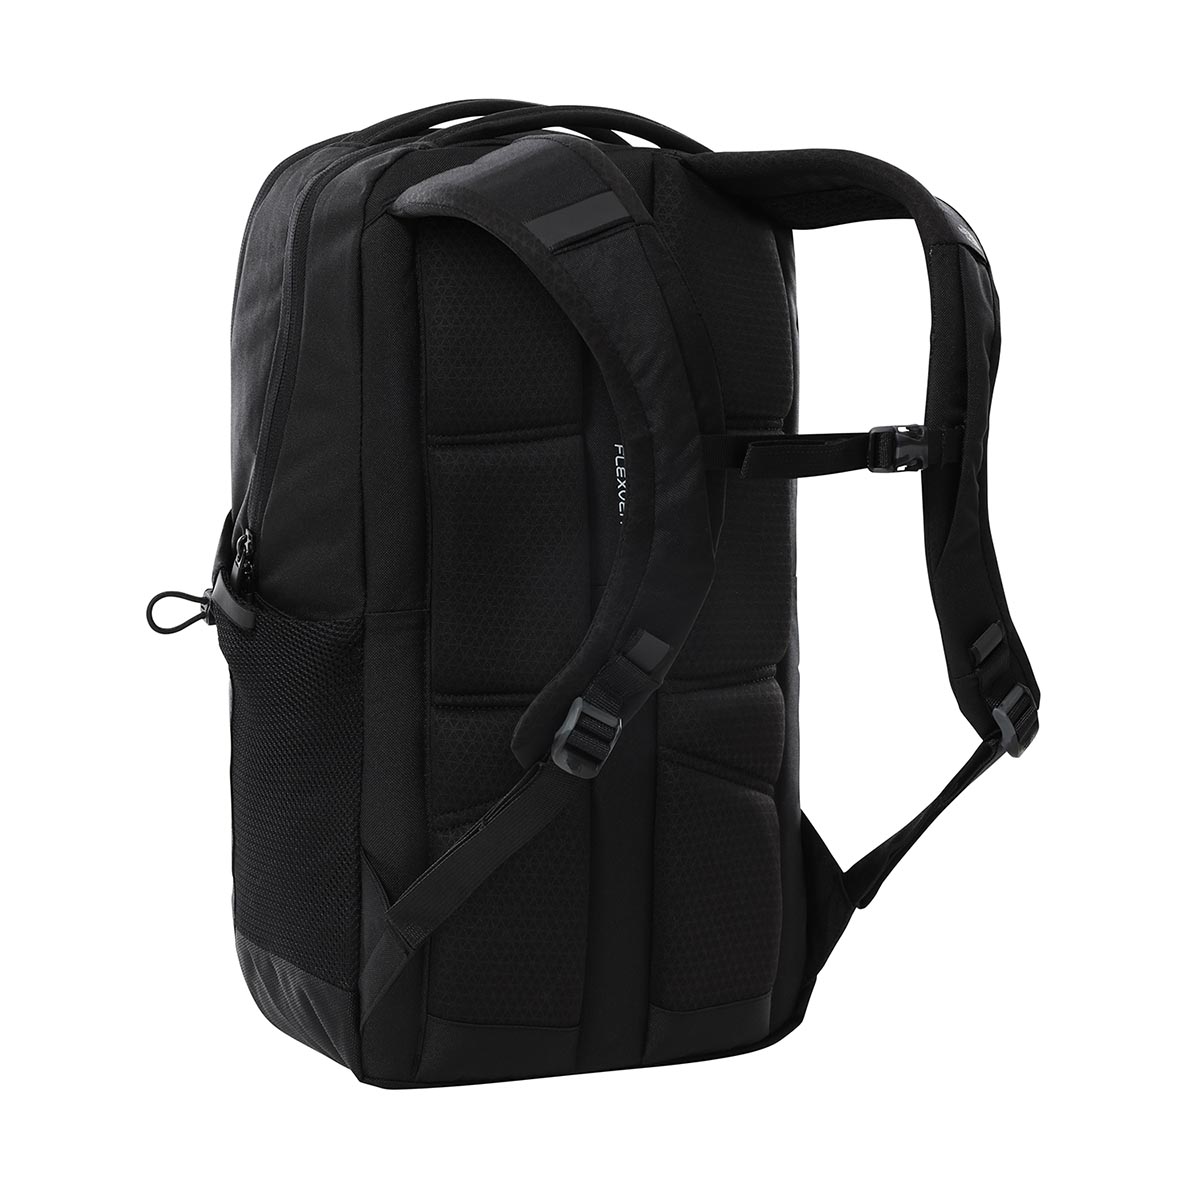 THE NORTH FACE - JESTER BACKPACK 22 L